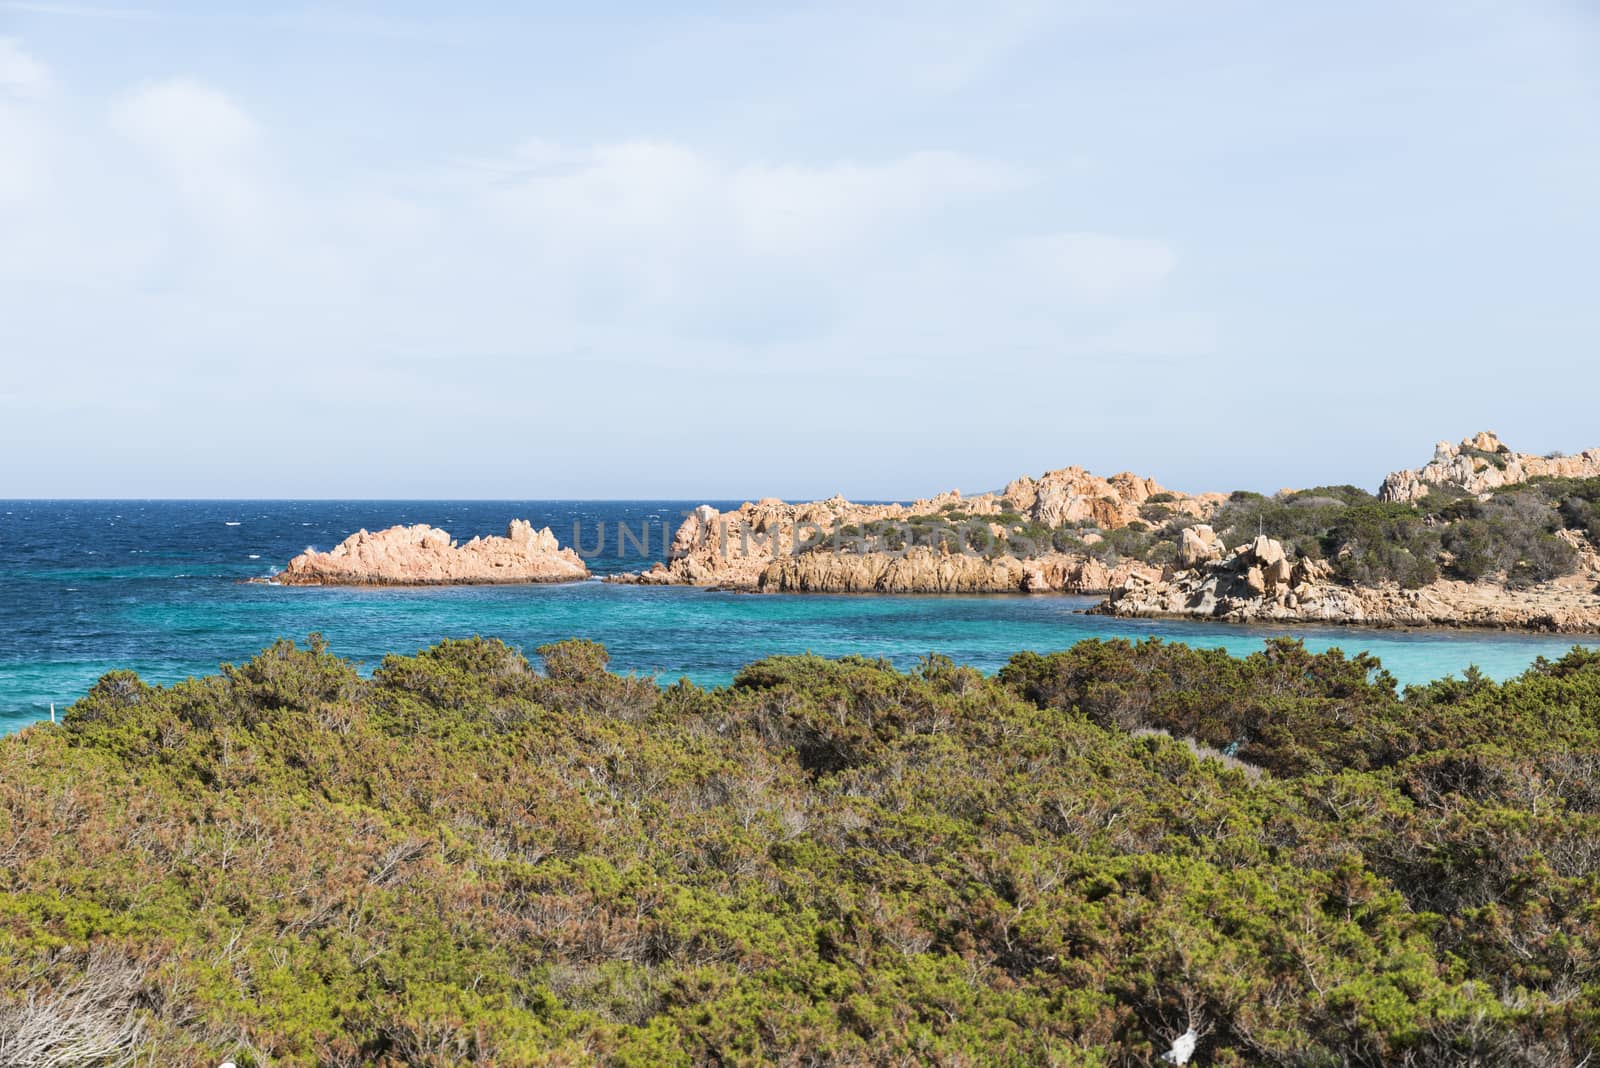 maddalena island nature rocks and ocean by compuinfoto